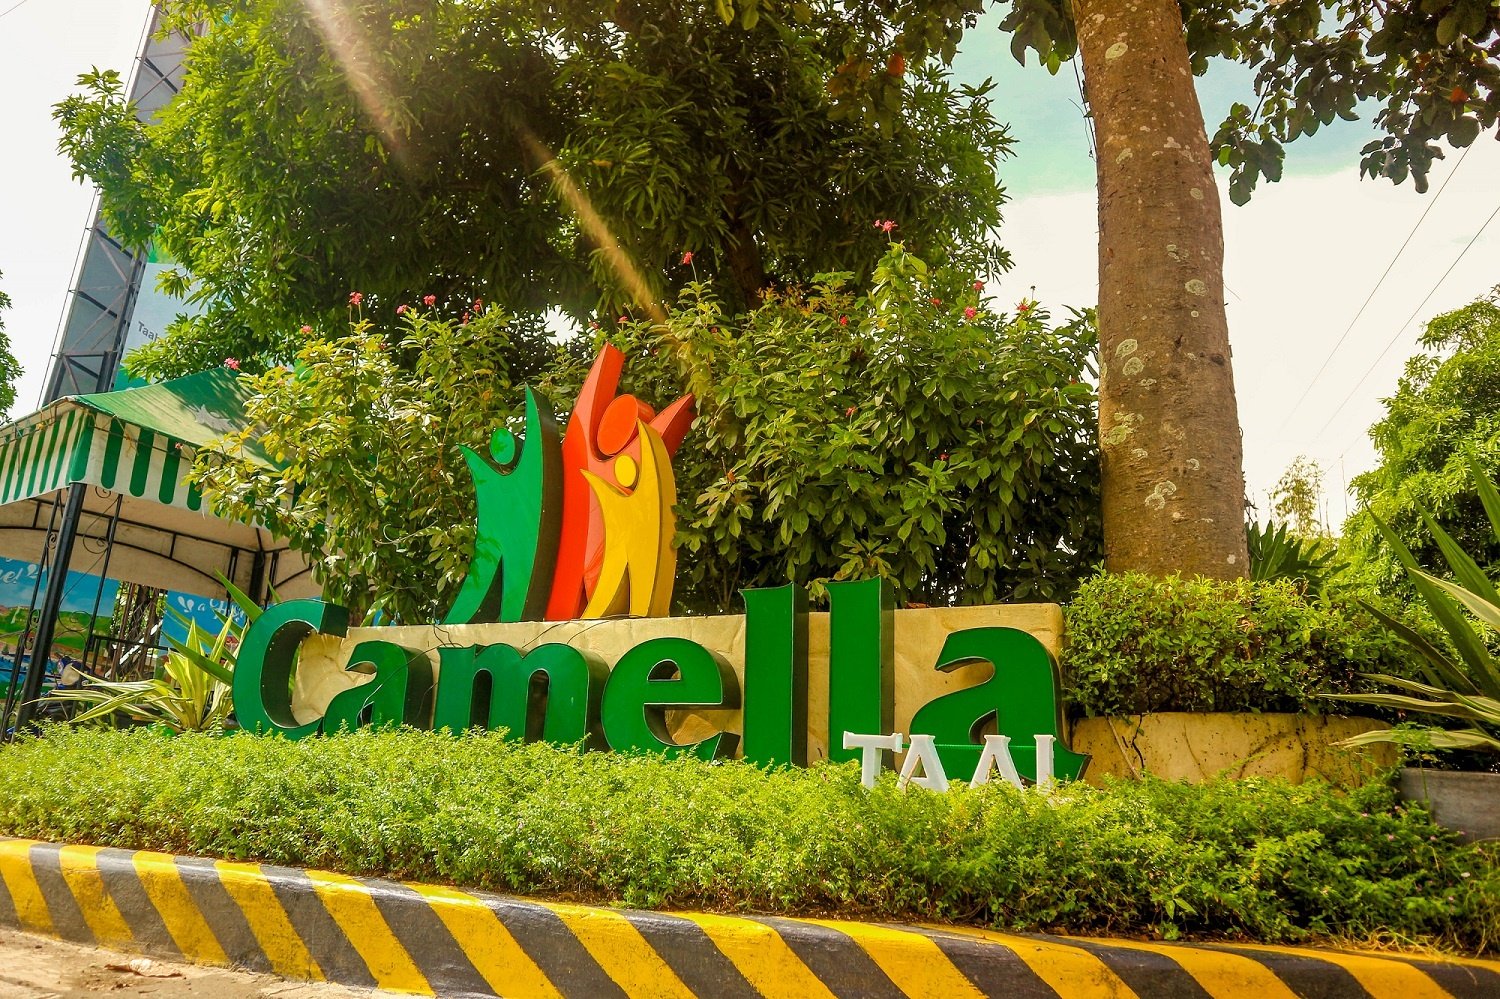 House and Lot in Batangas-Camella Taal marker